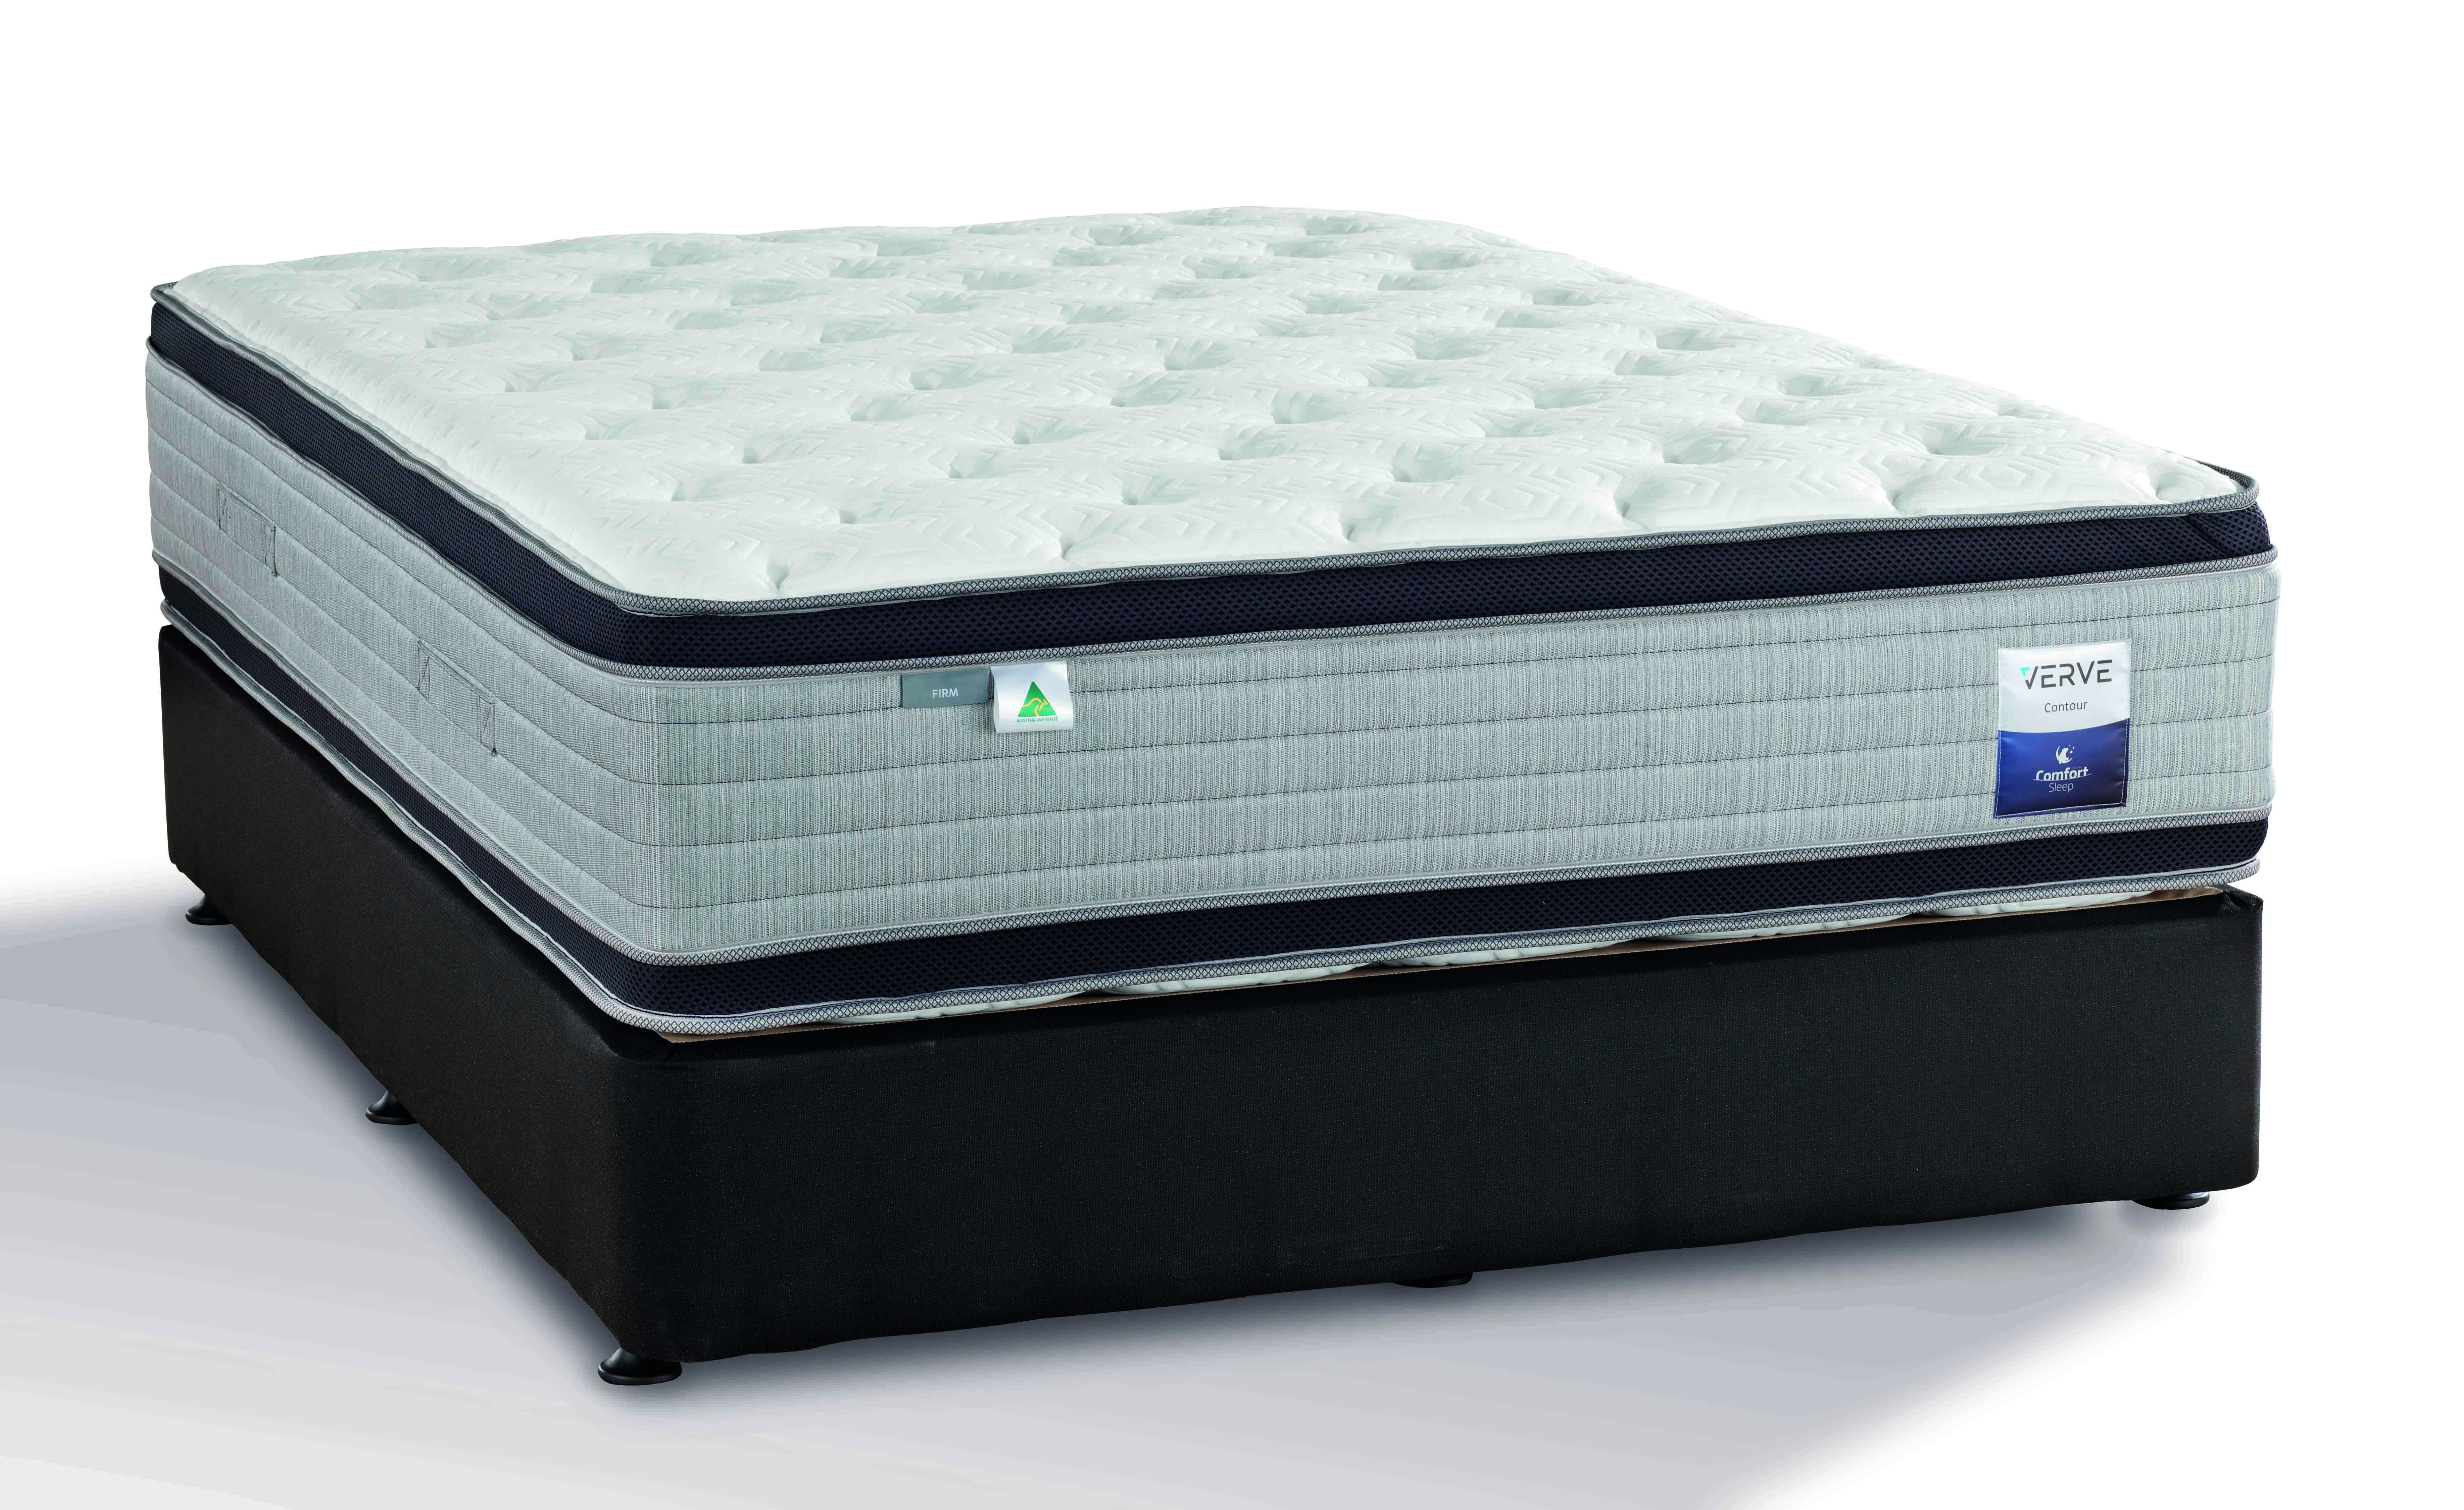 Find 68+ Stunning contour collection kelly ii mattress review Trend Of The Year